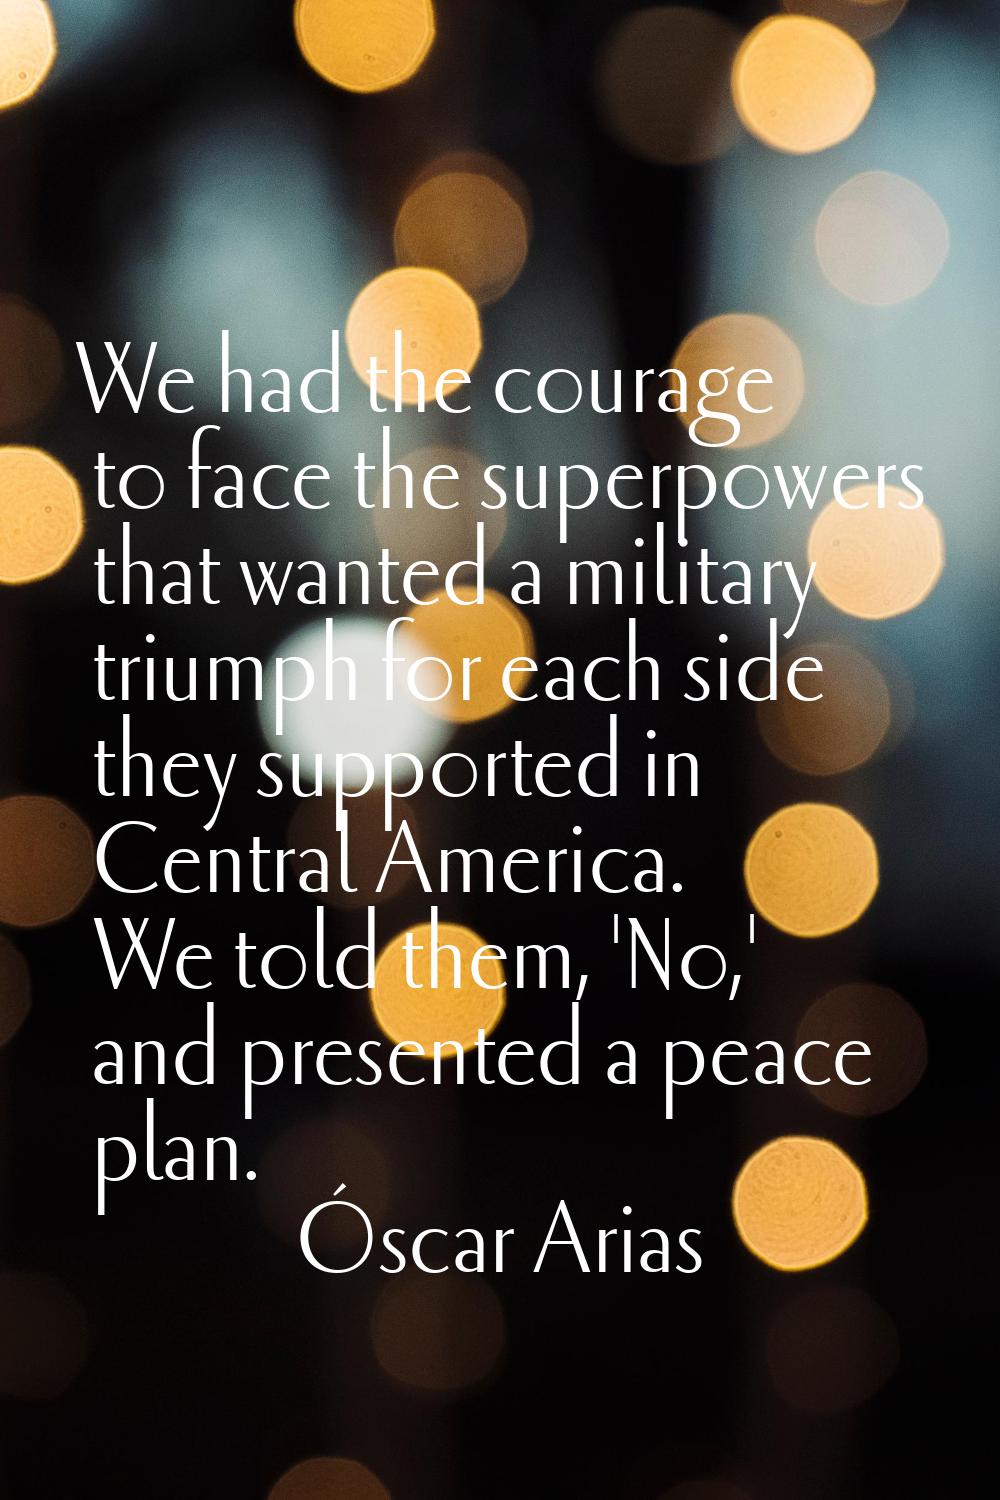 We had the courage to face the superpowers that wanted a military triumph for each side they suppor